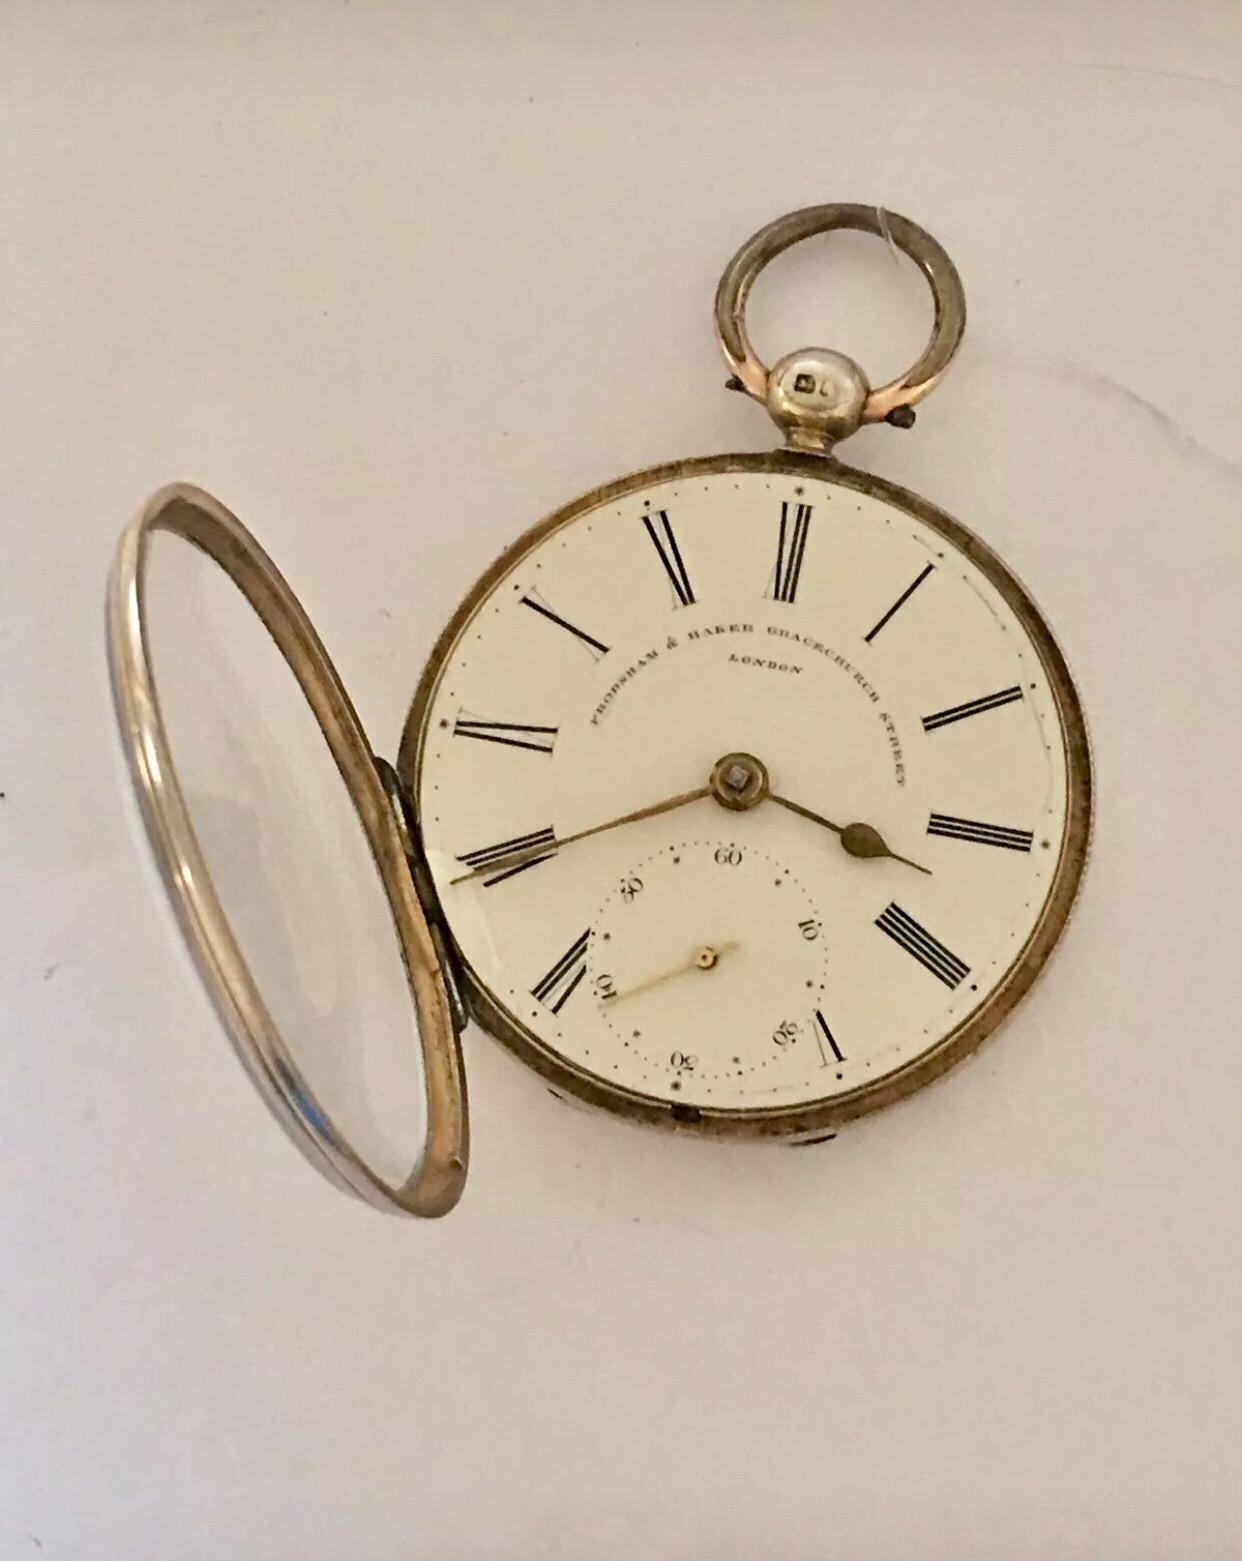 Women's or Men's Silver Gilt English Lever Fusee Pocket Watch by Frodsham, London for Spares/Repa